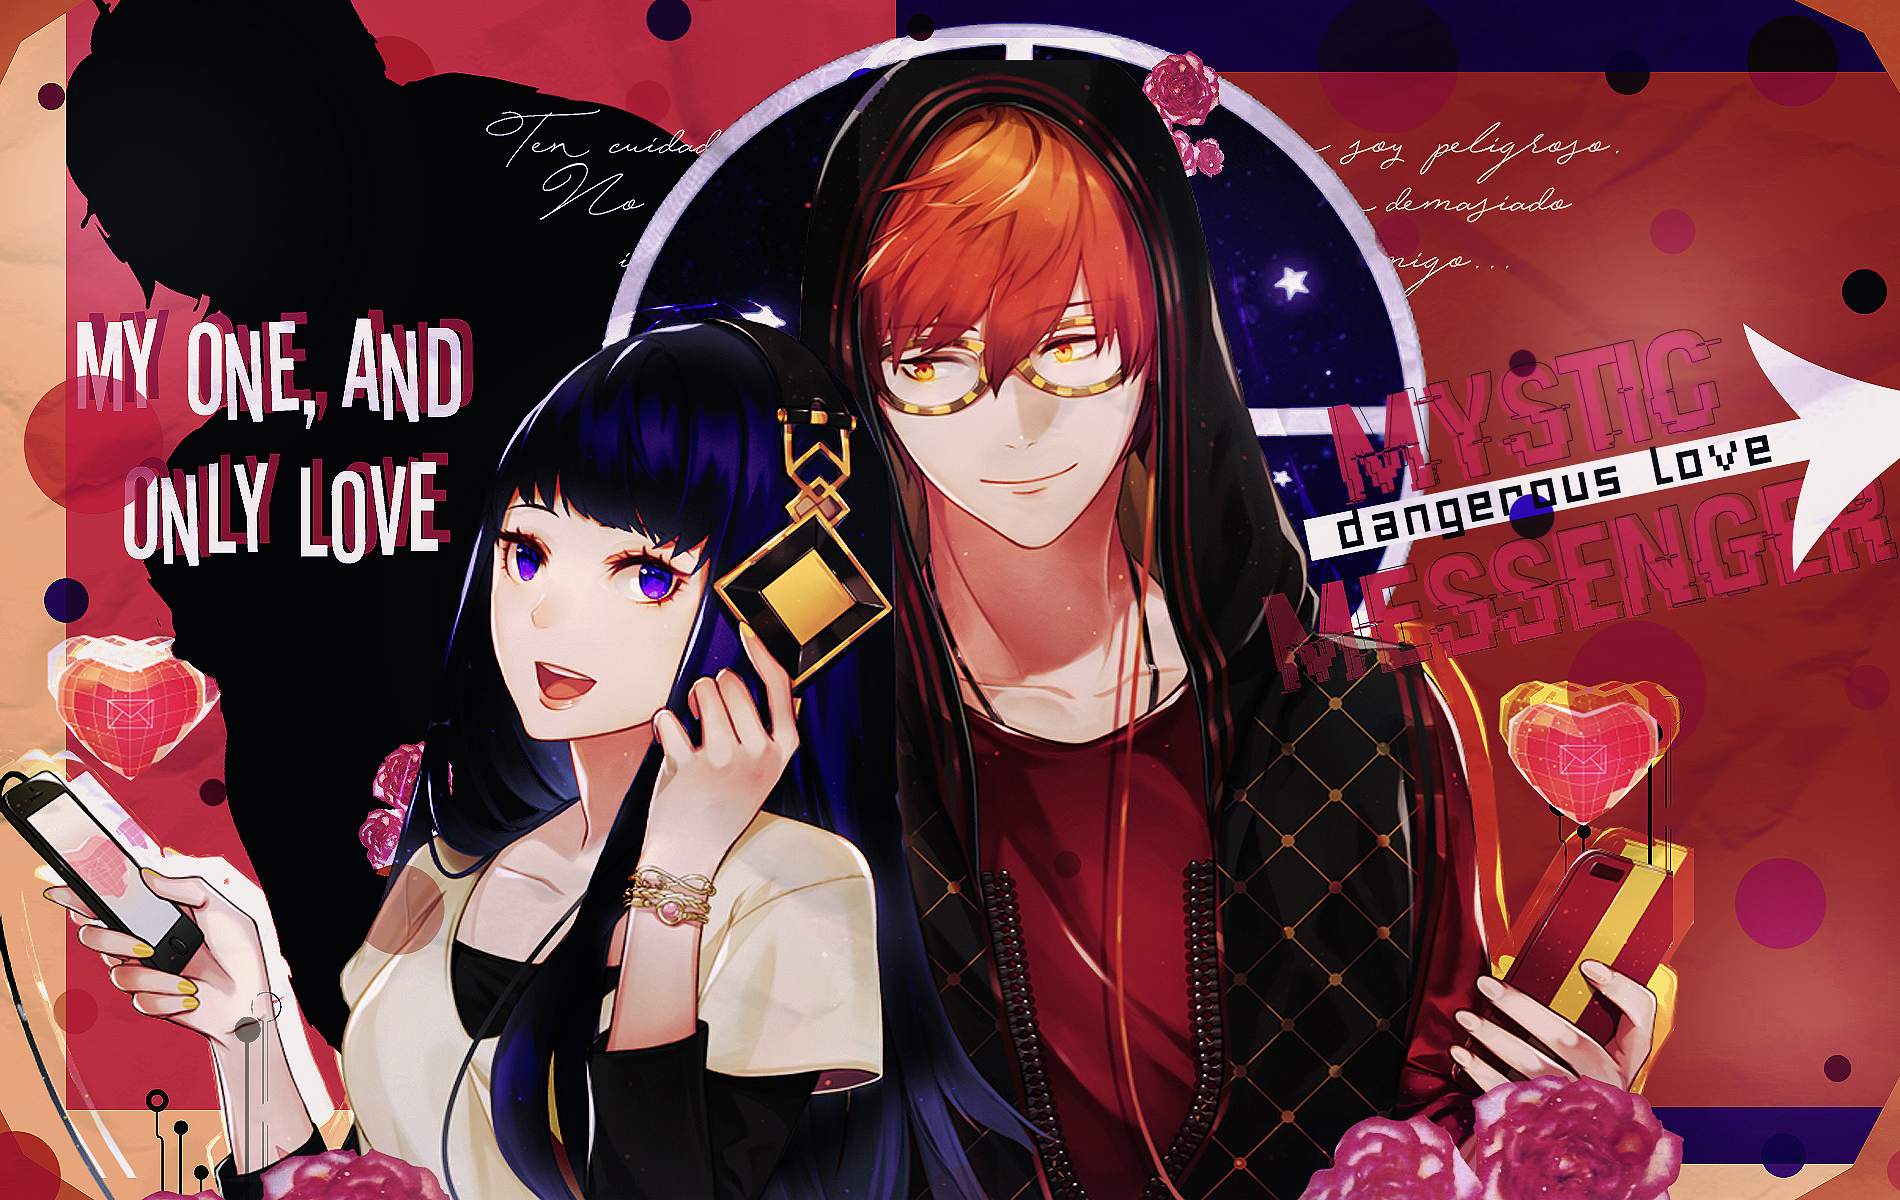 Mi One And Only Love Mystic Messenger Wallpaper By Mioa